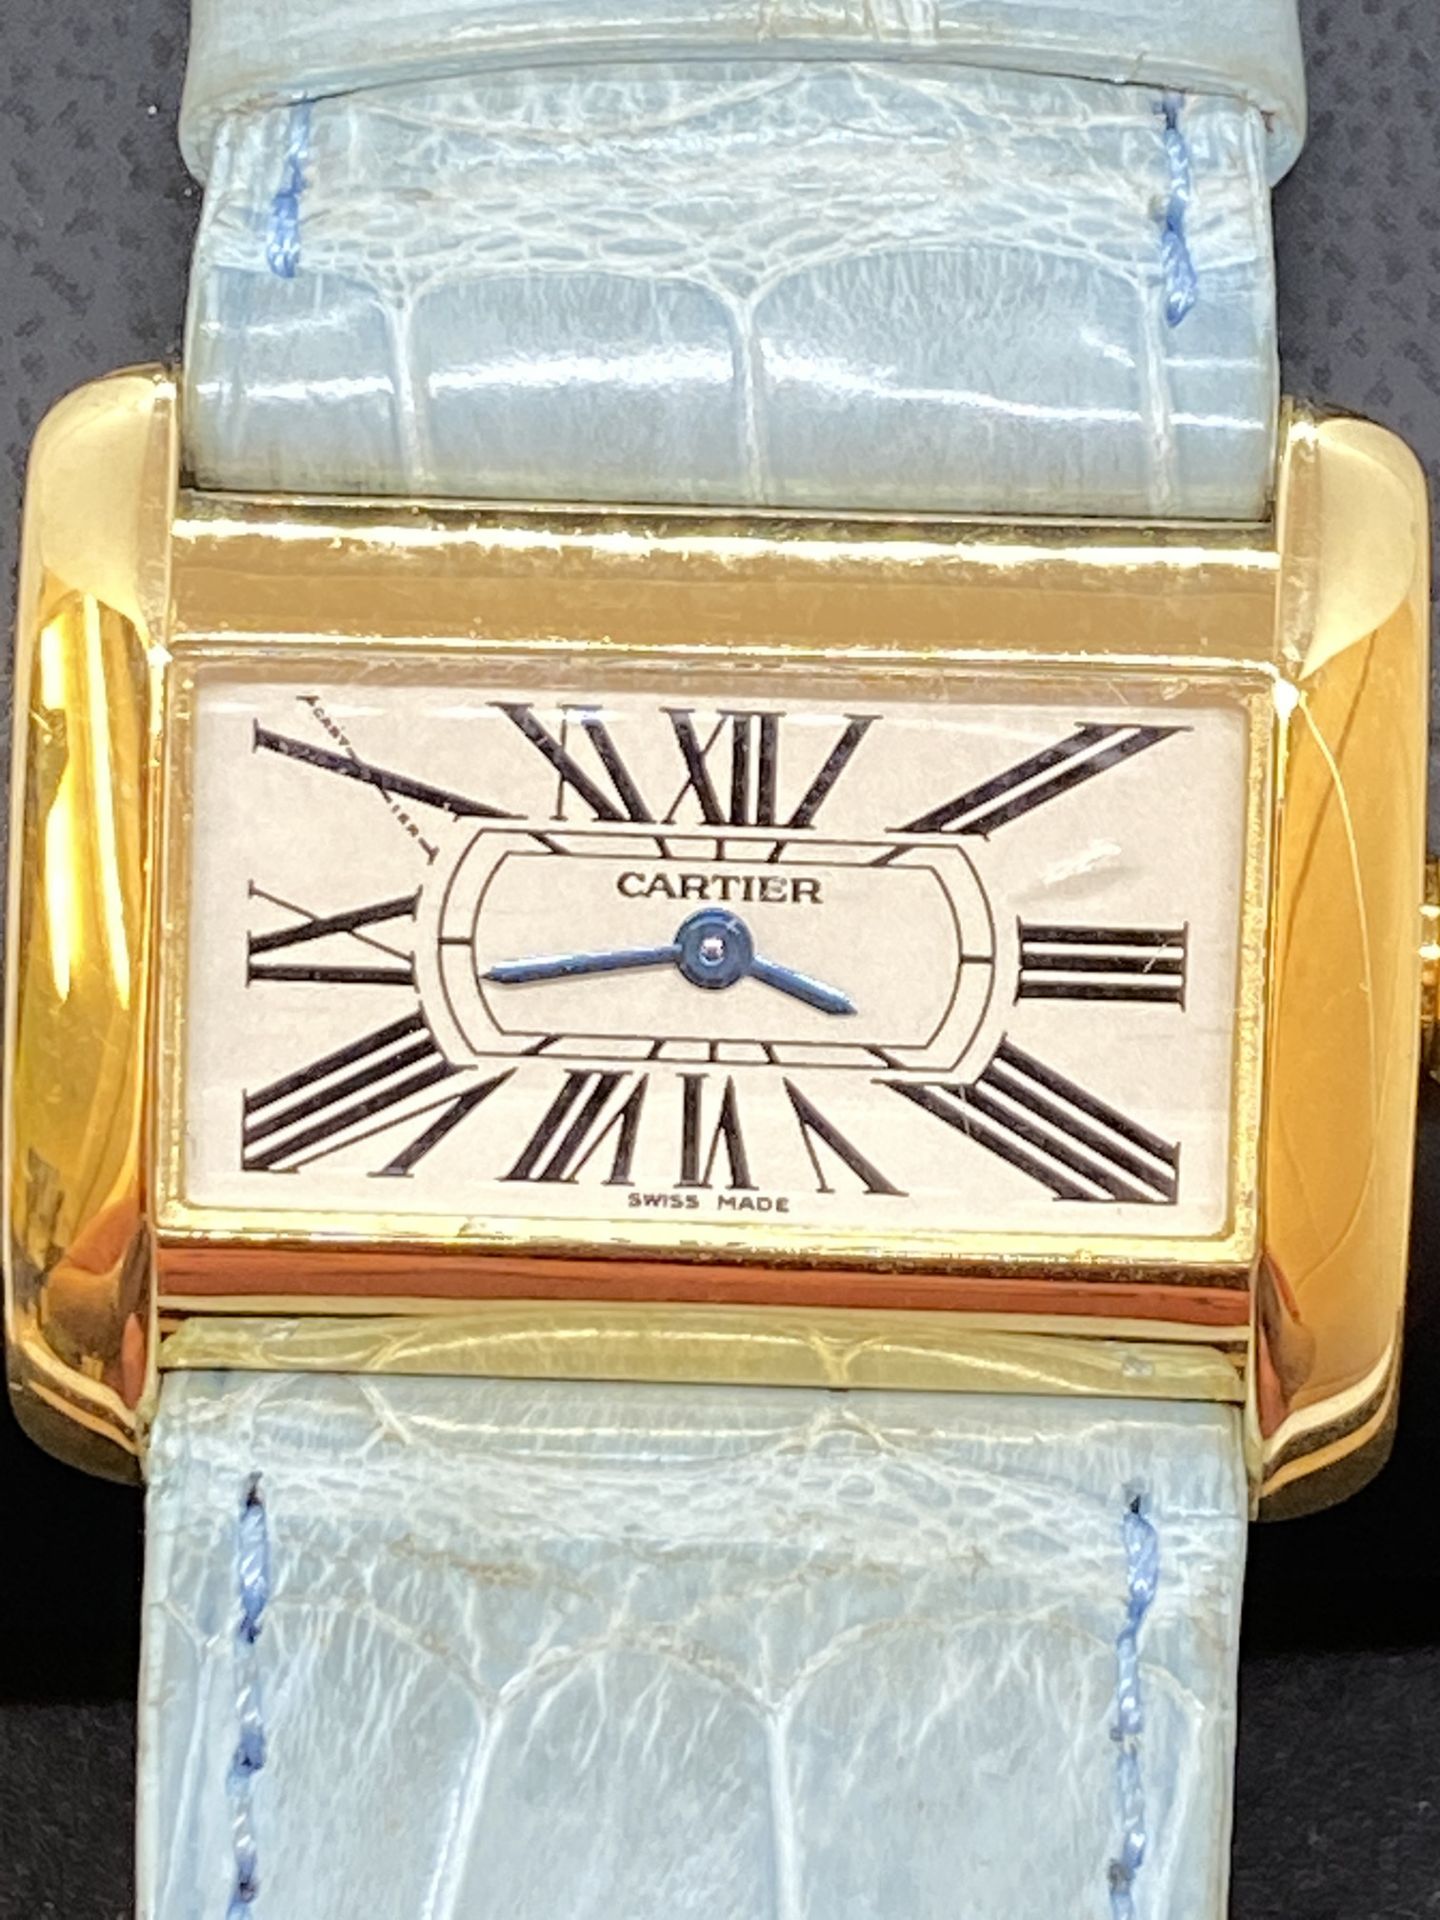 18ct GOLD CARTIER 2801 WATCH - Image 2 of 11